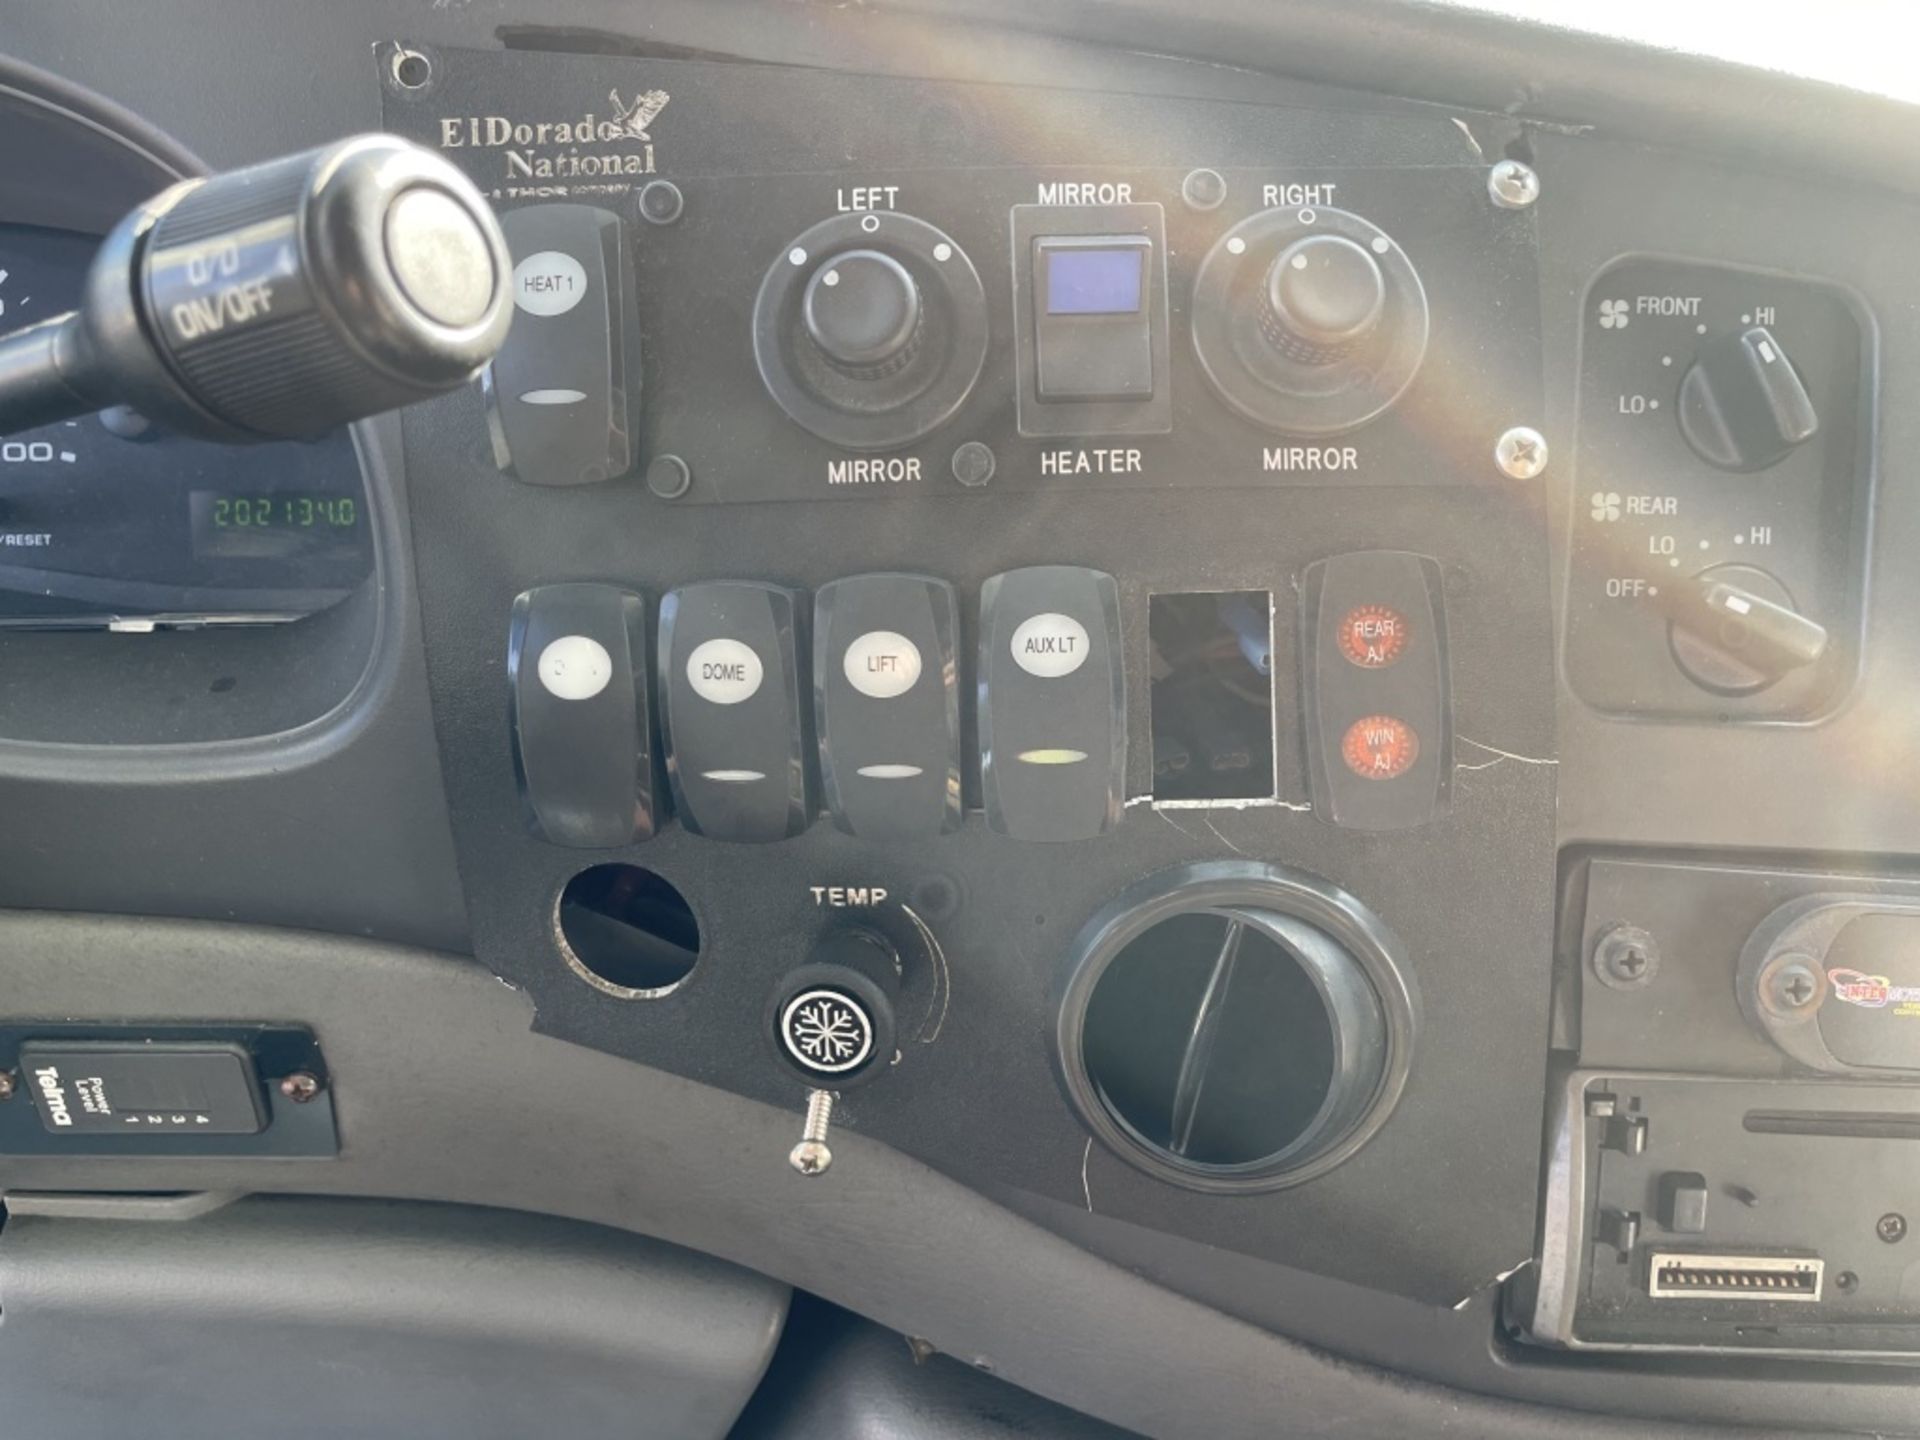 2007 Ford E450 Transit Bus - Image 20 of 23